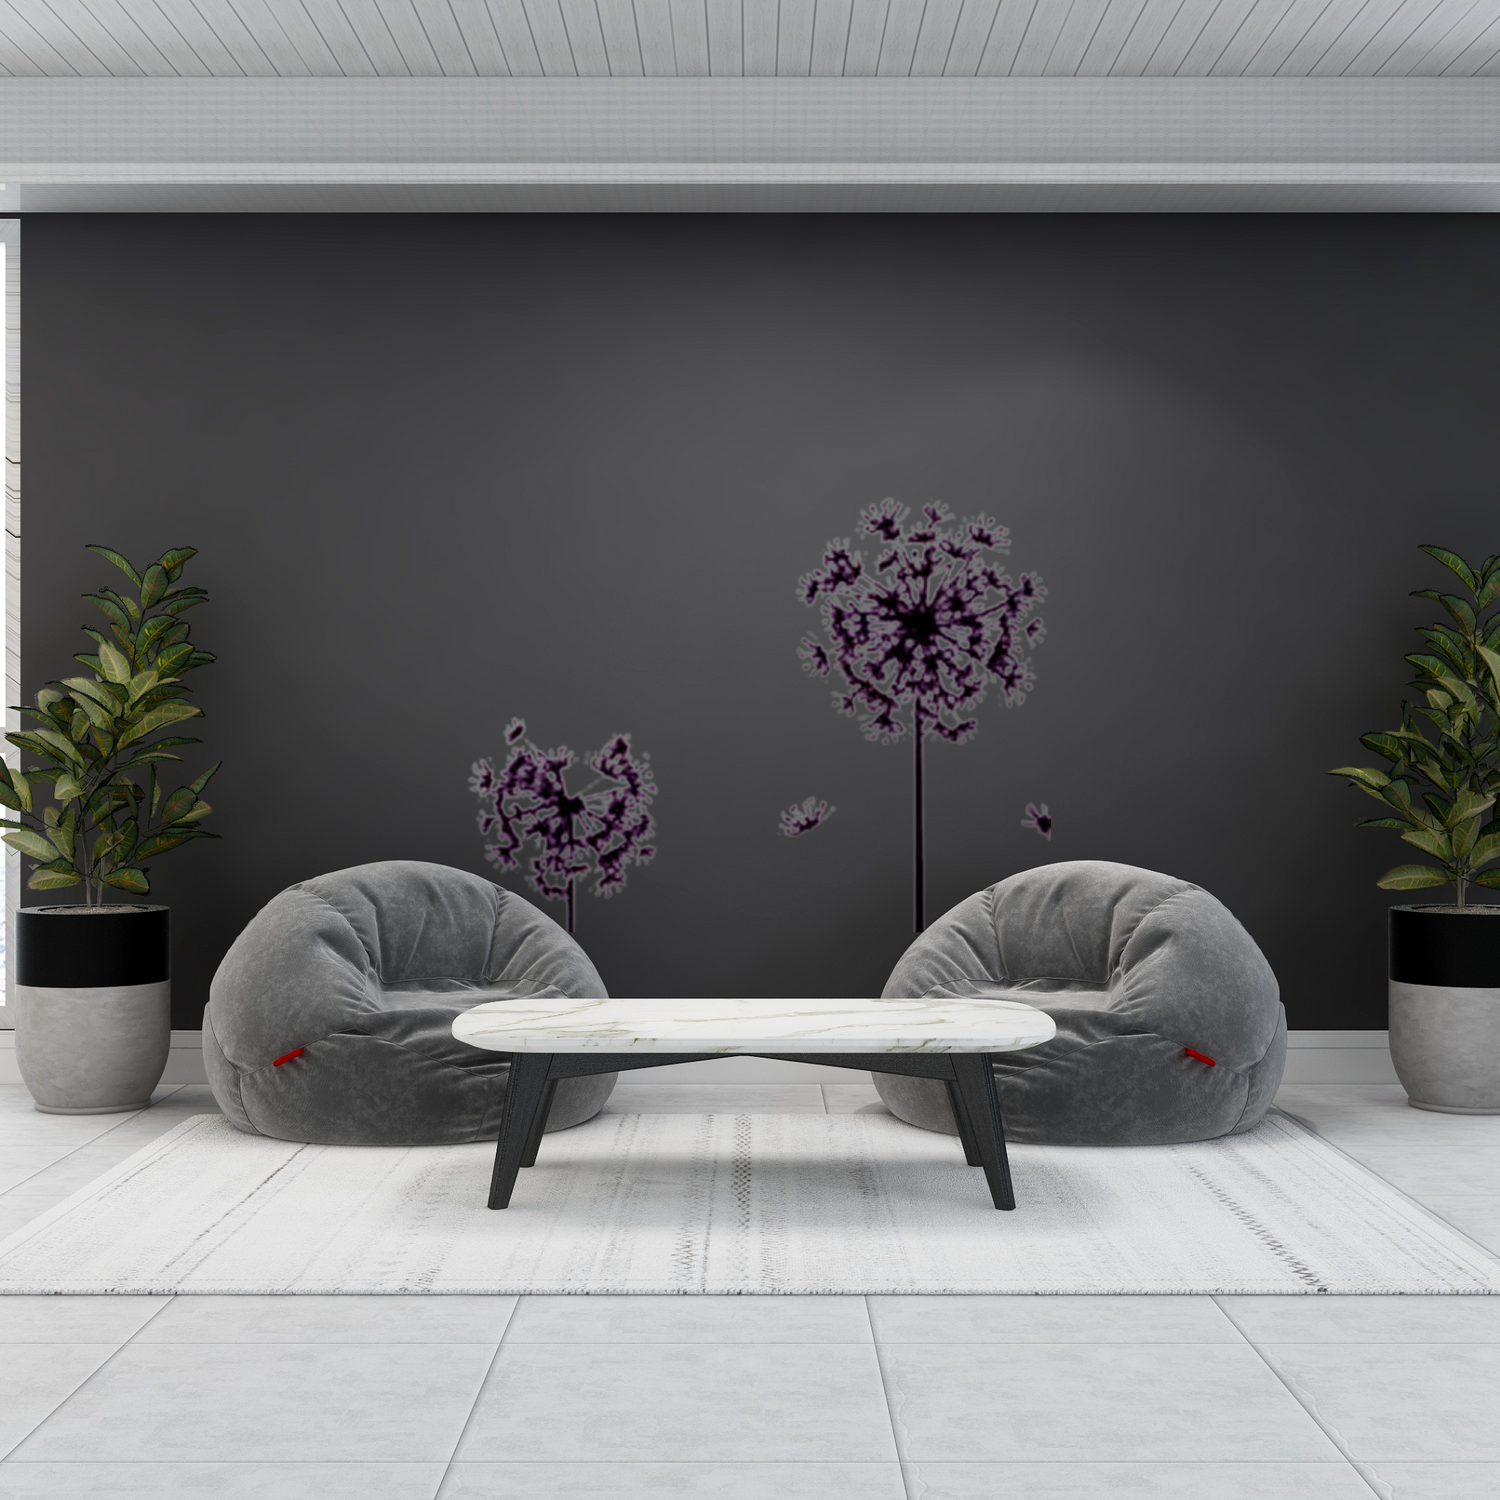  durable wall stickers